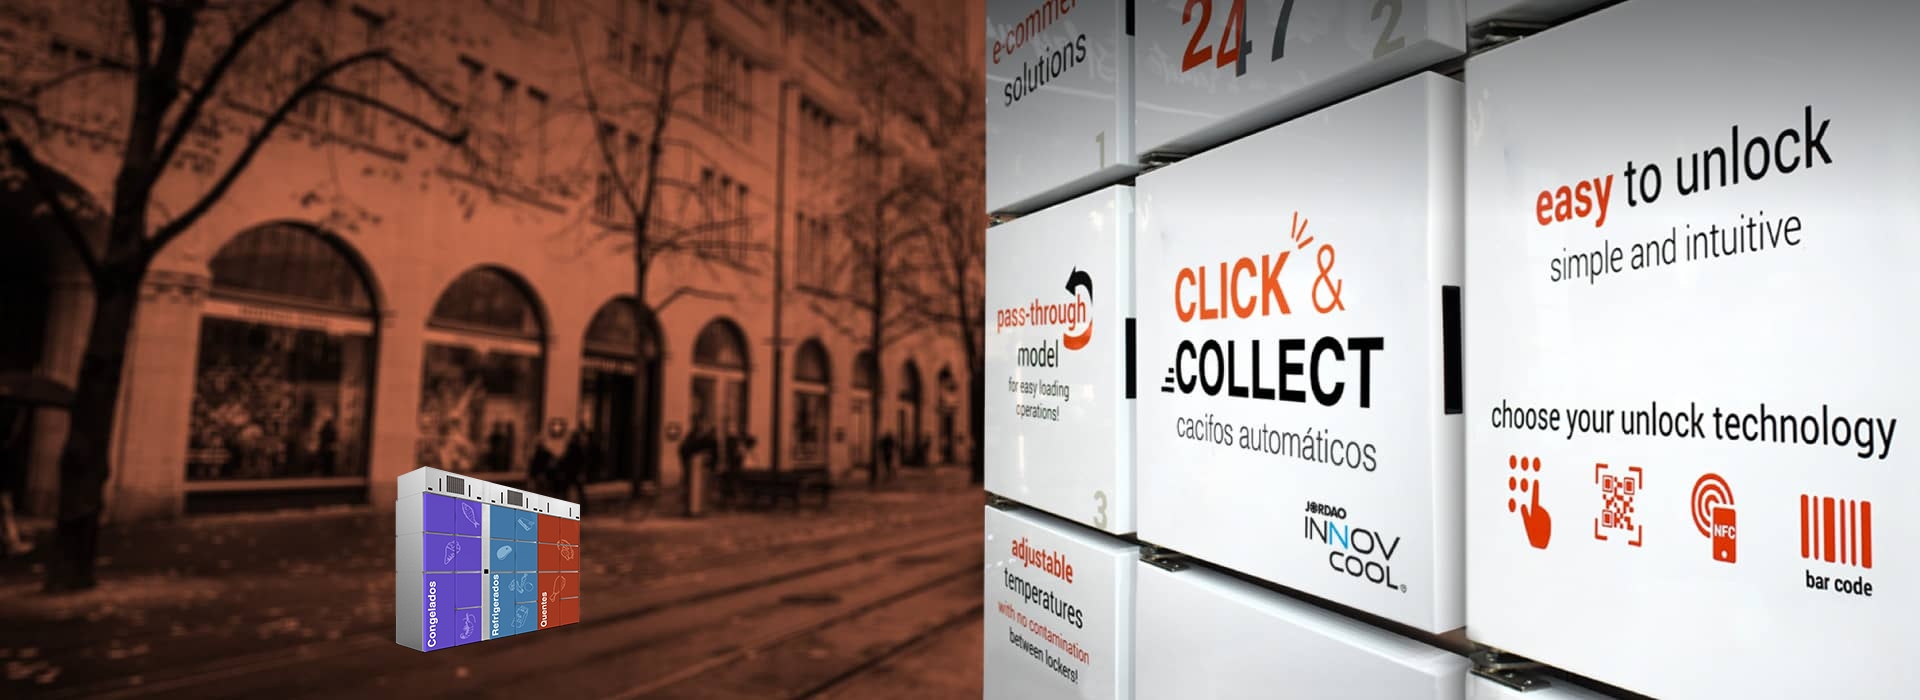 homepage - CLICK & COLLECT